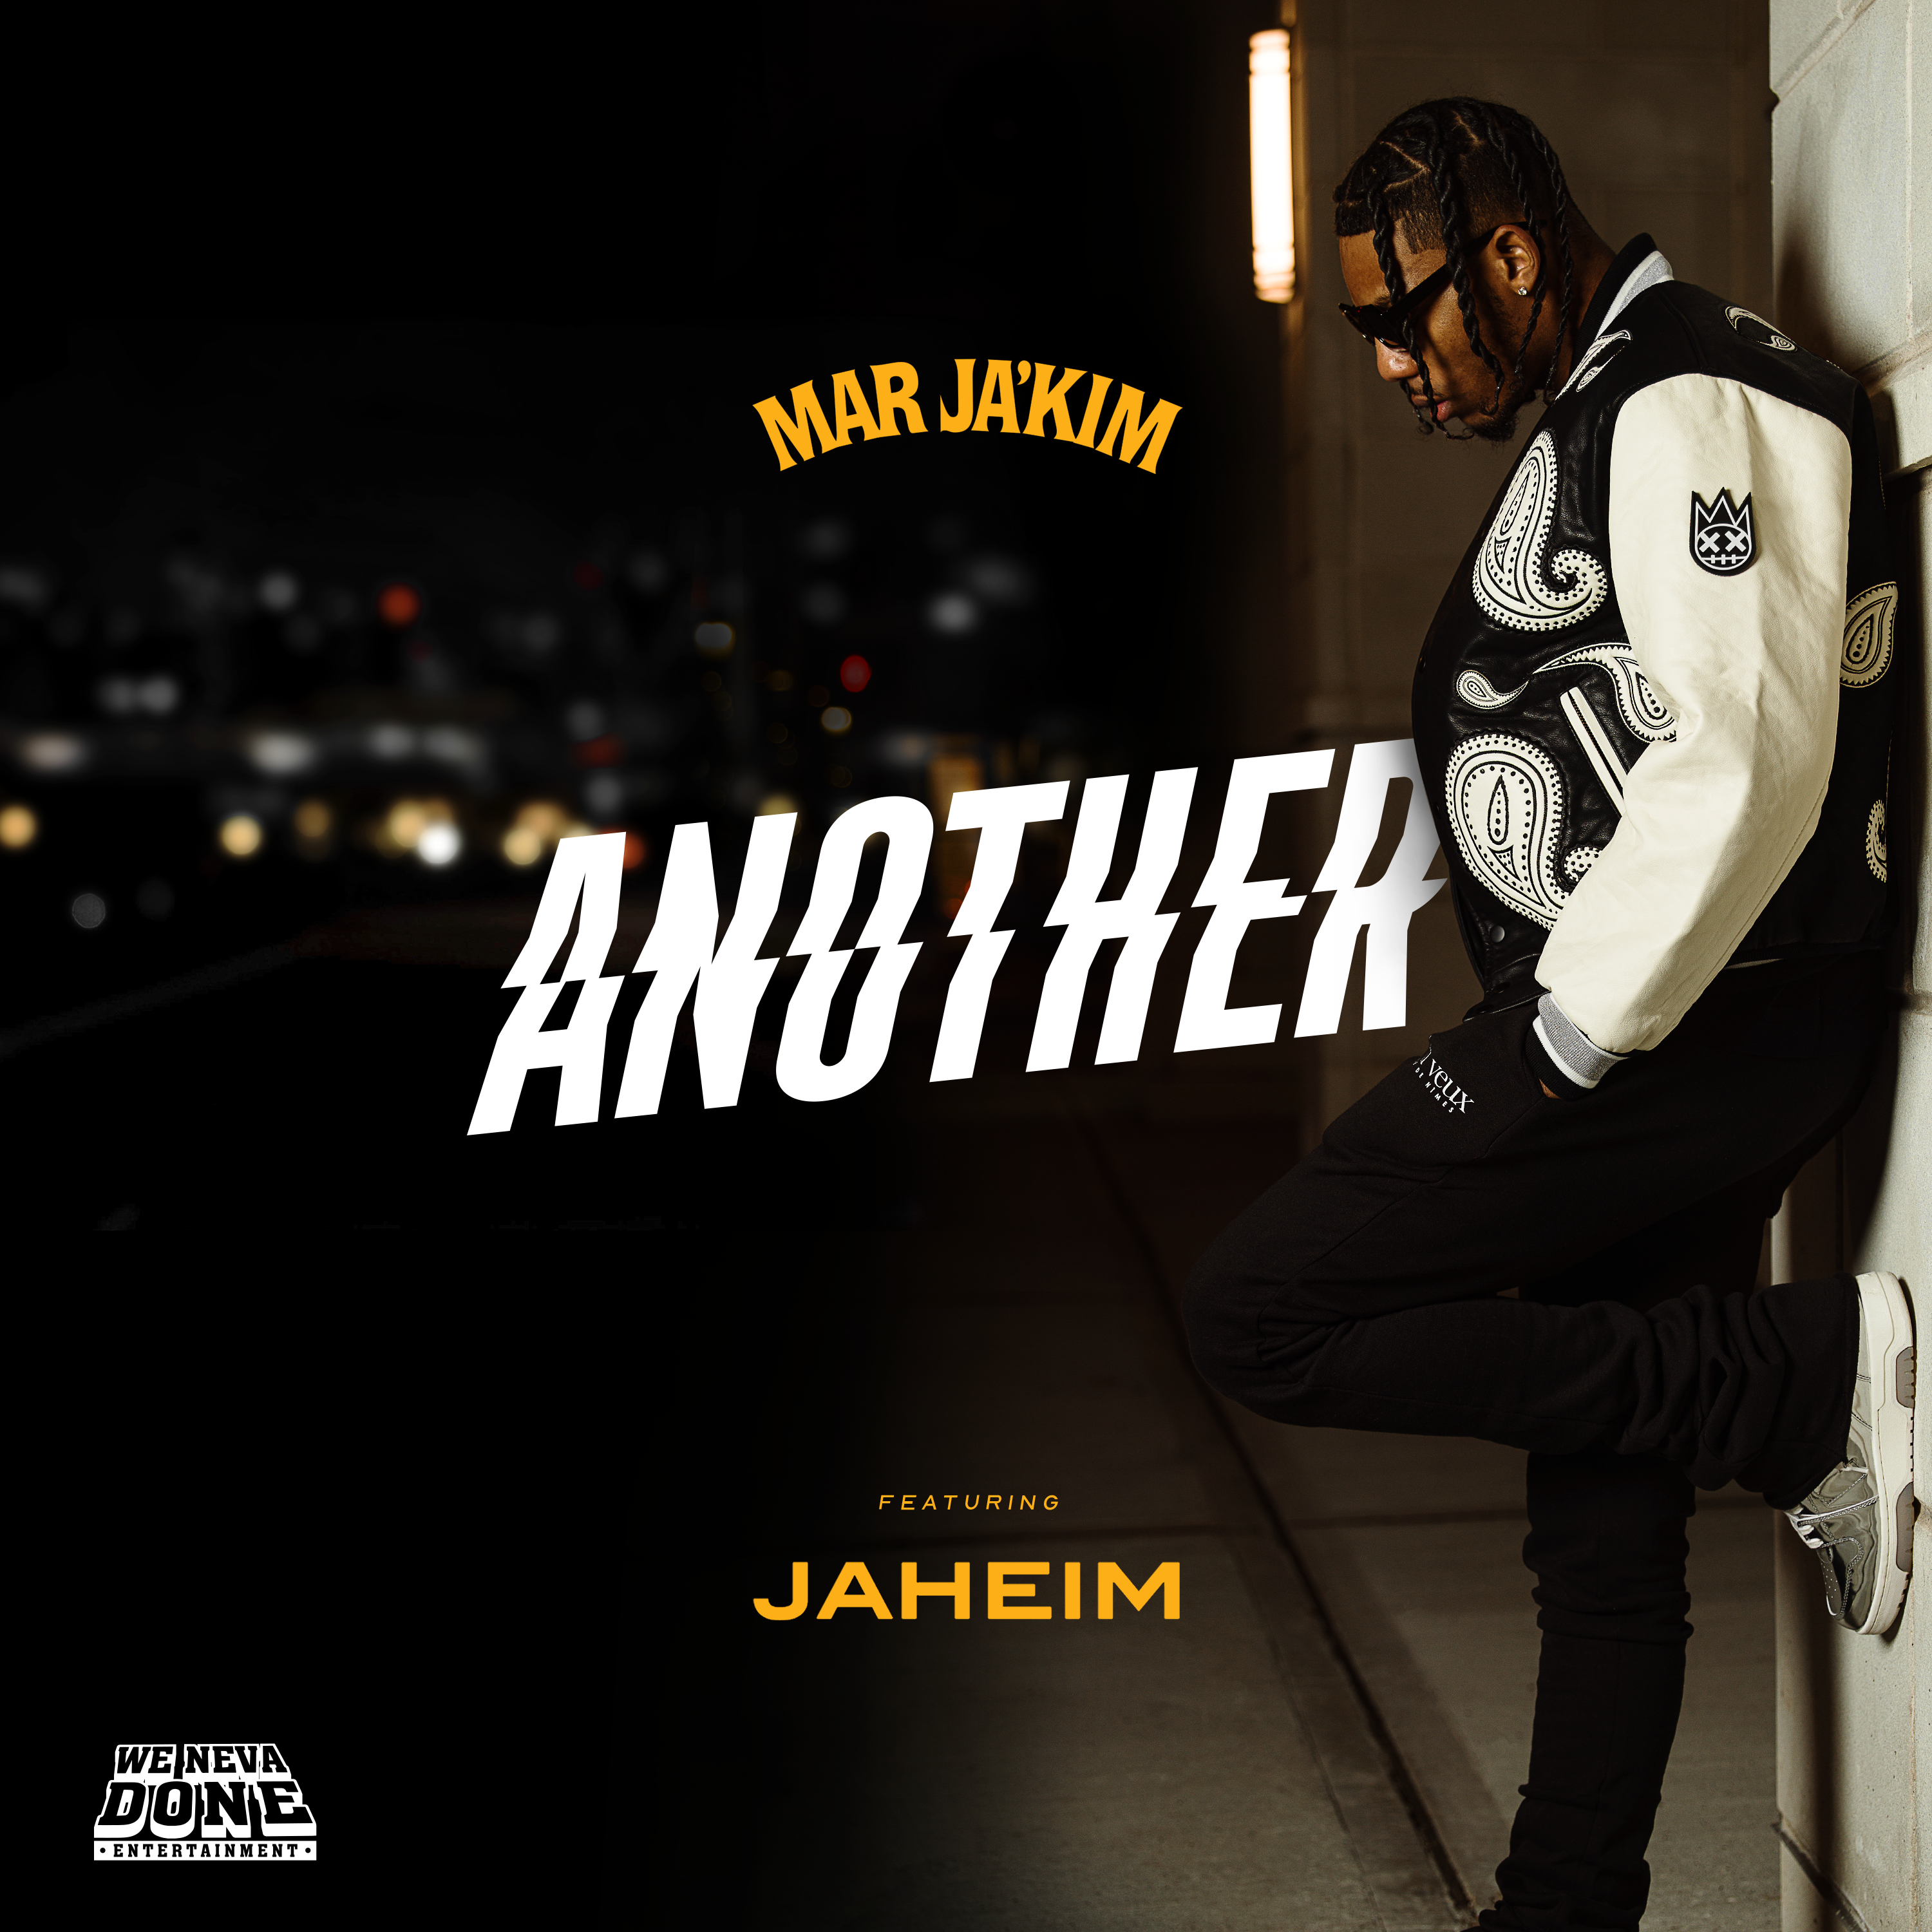 MARJA’KIM Ascends to new Heights with New Release "Another." Featuring Grammy-Nominated Global Superstar Jaheim